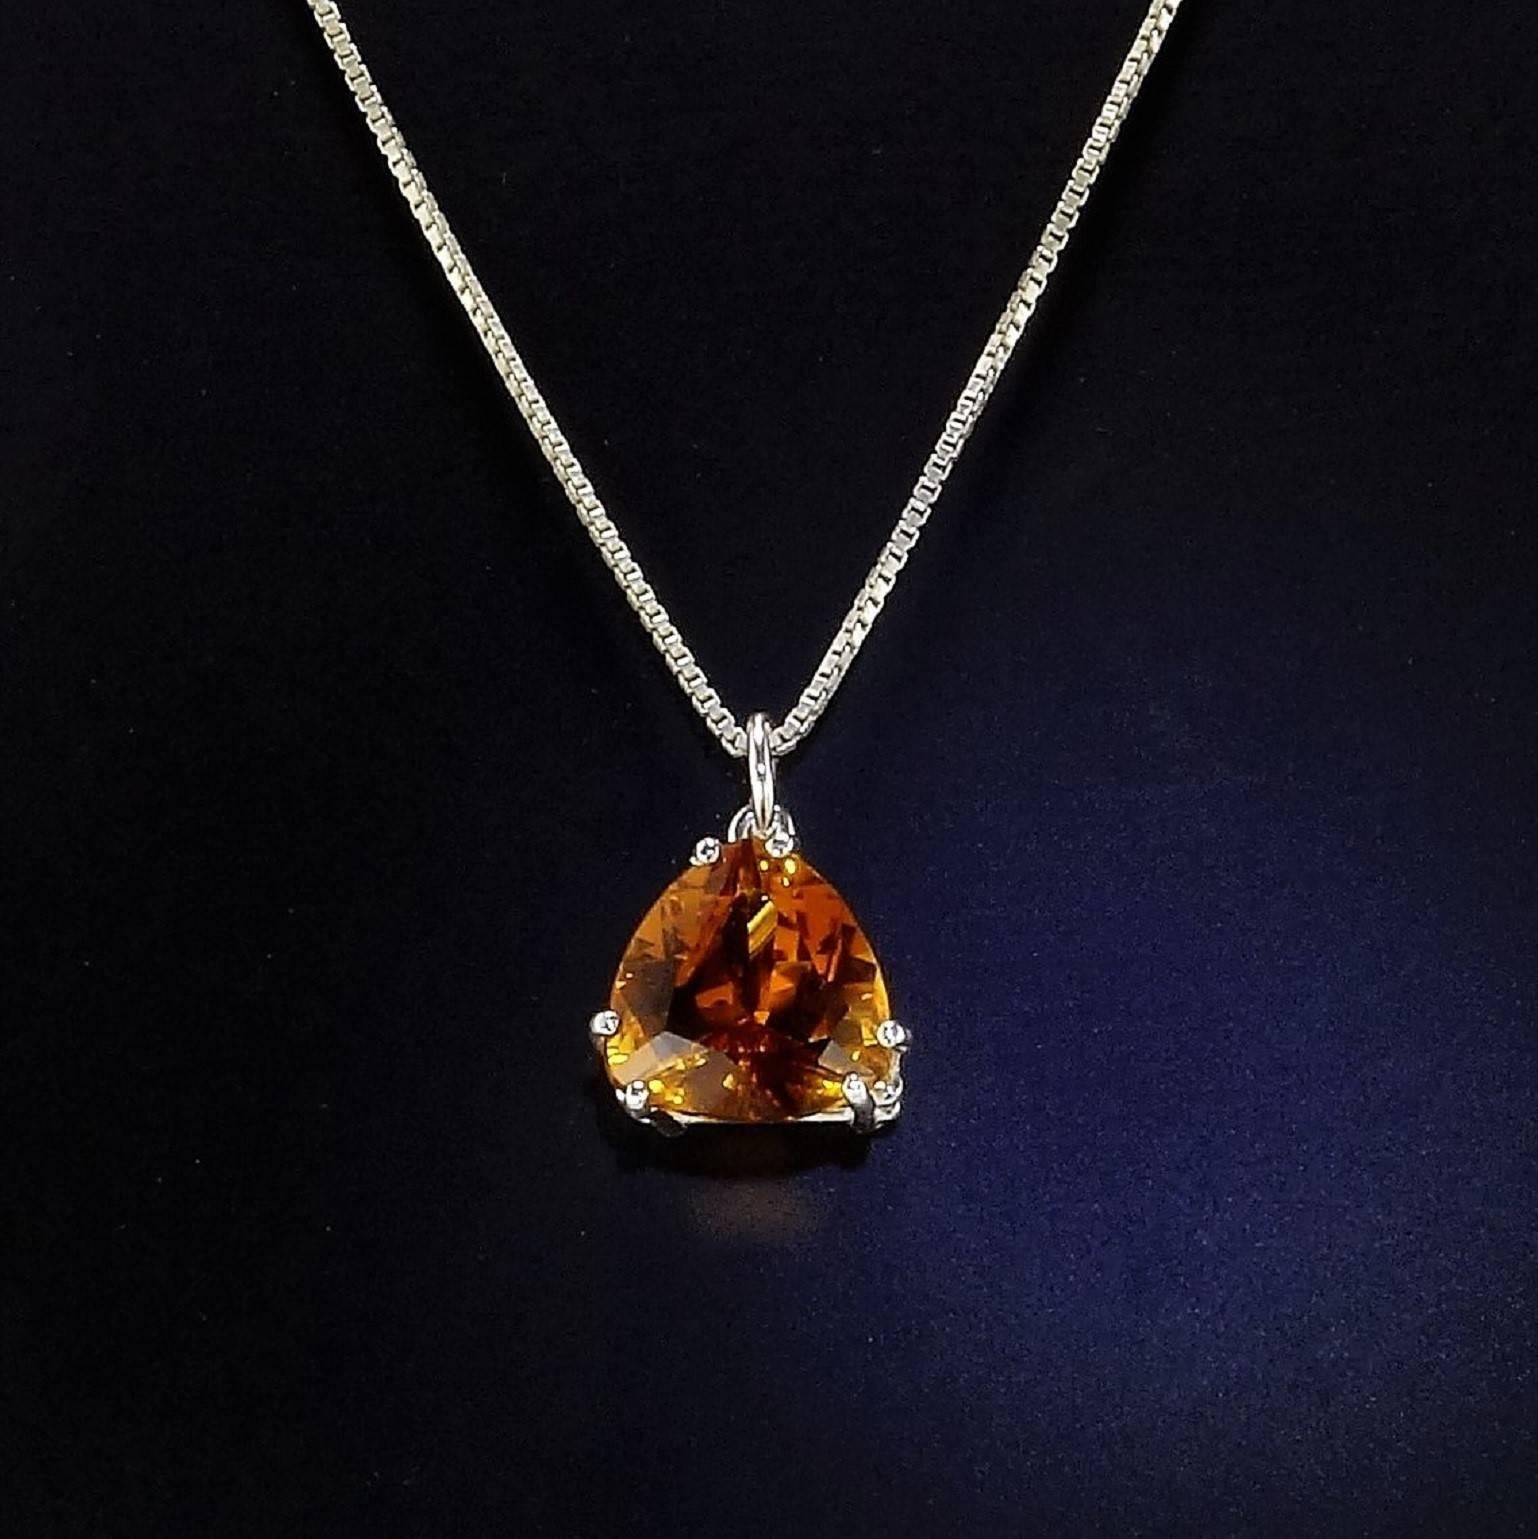 Sparkling, deep golden color Trillion Citrine in Sterling Silver Pendant. 12mm x 12mm. 5.97ct. This is a lovely wear everywhere pendant. This color brightens up everything.
Citrine is the November birthstone.